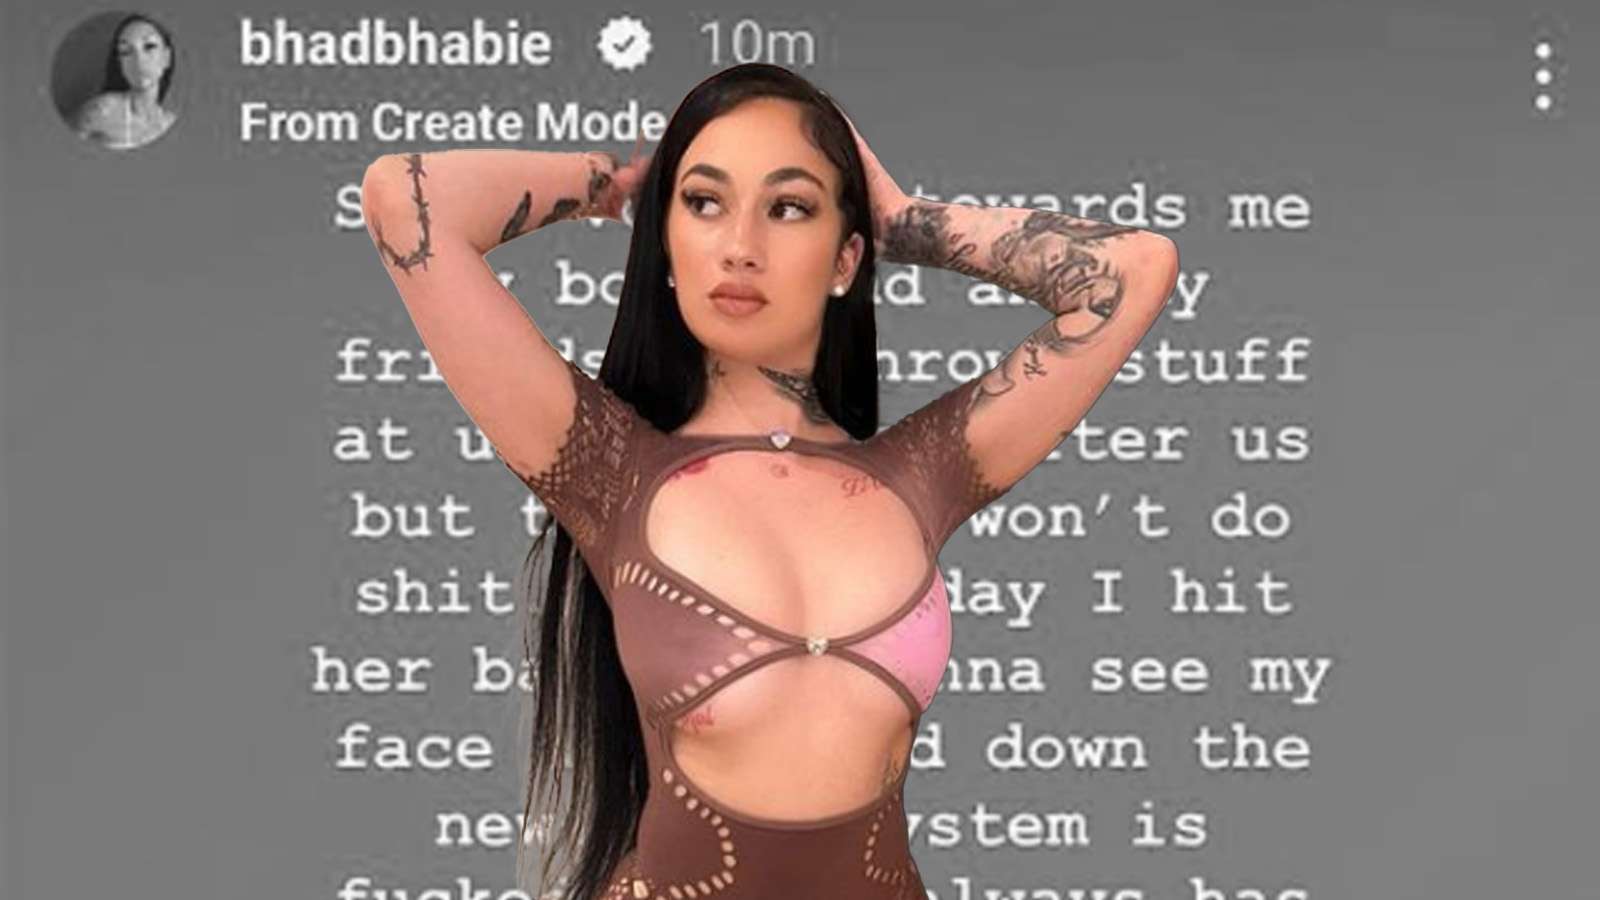 Bhad Bhabie claims she lives in fear of her mother in alarming Instagram post